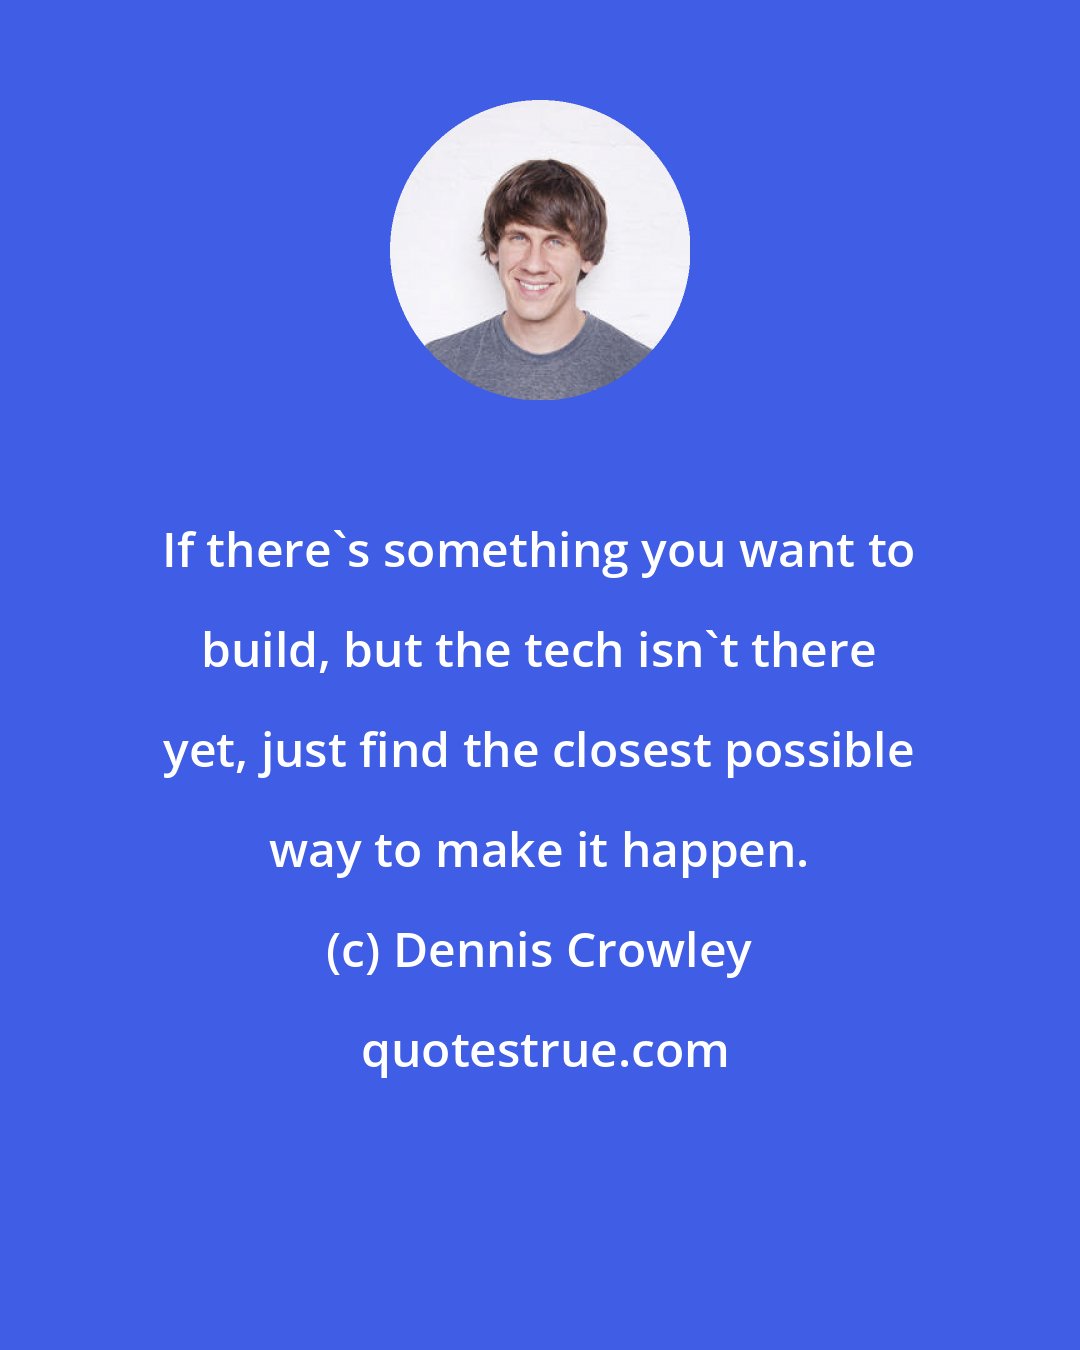 Dennis Crowley: If there's something you want to build, but the tech isn't there yet, just find the closest possible way to make it happen.